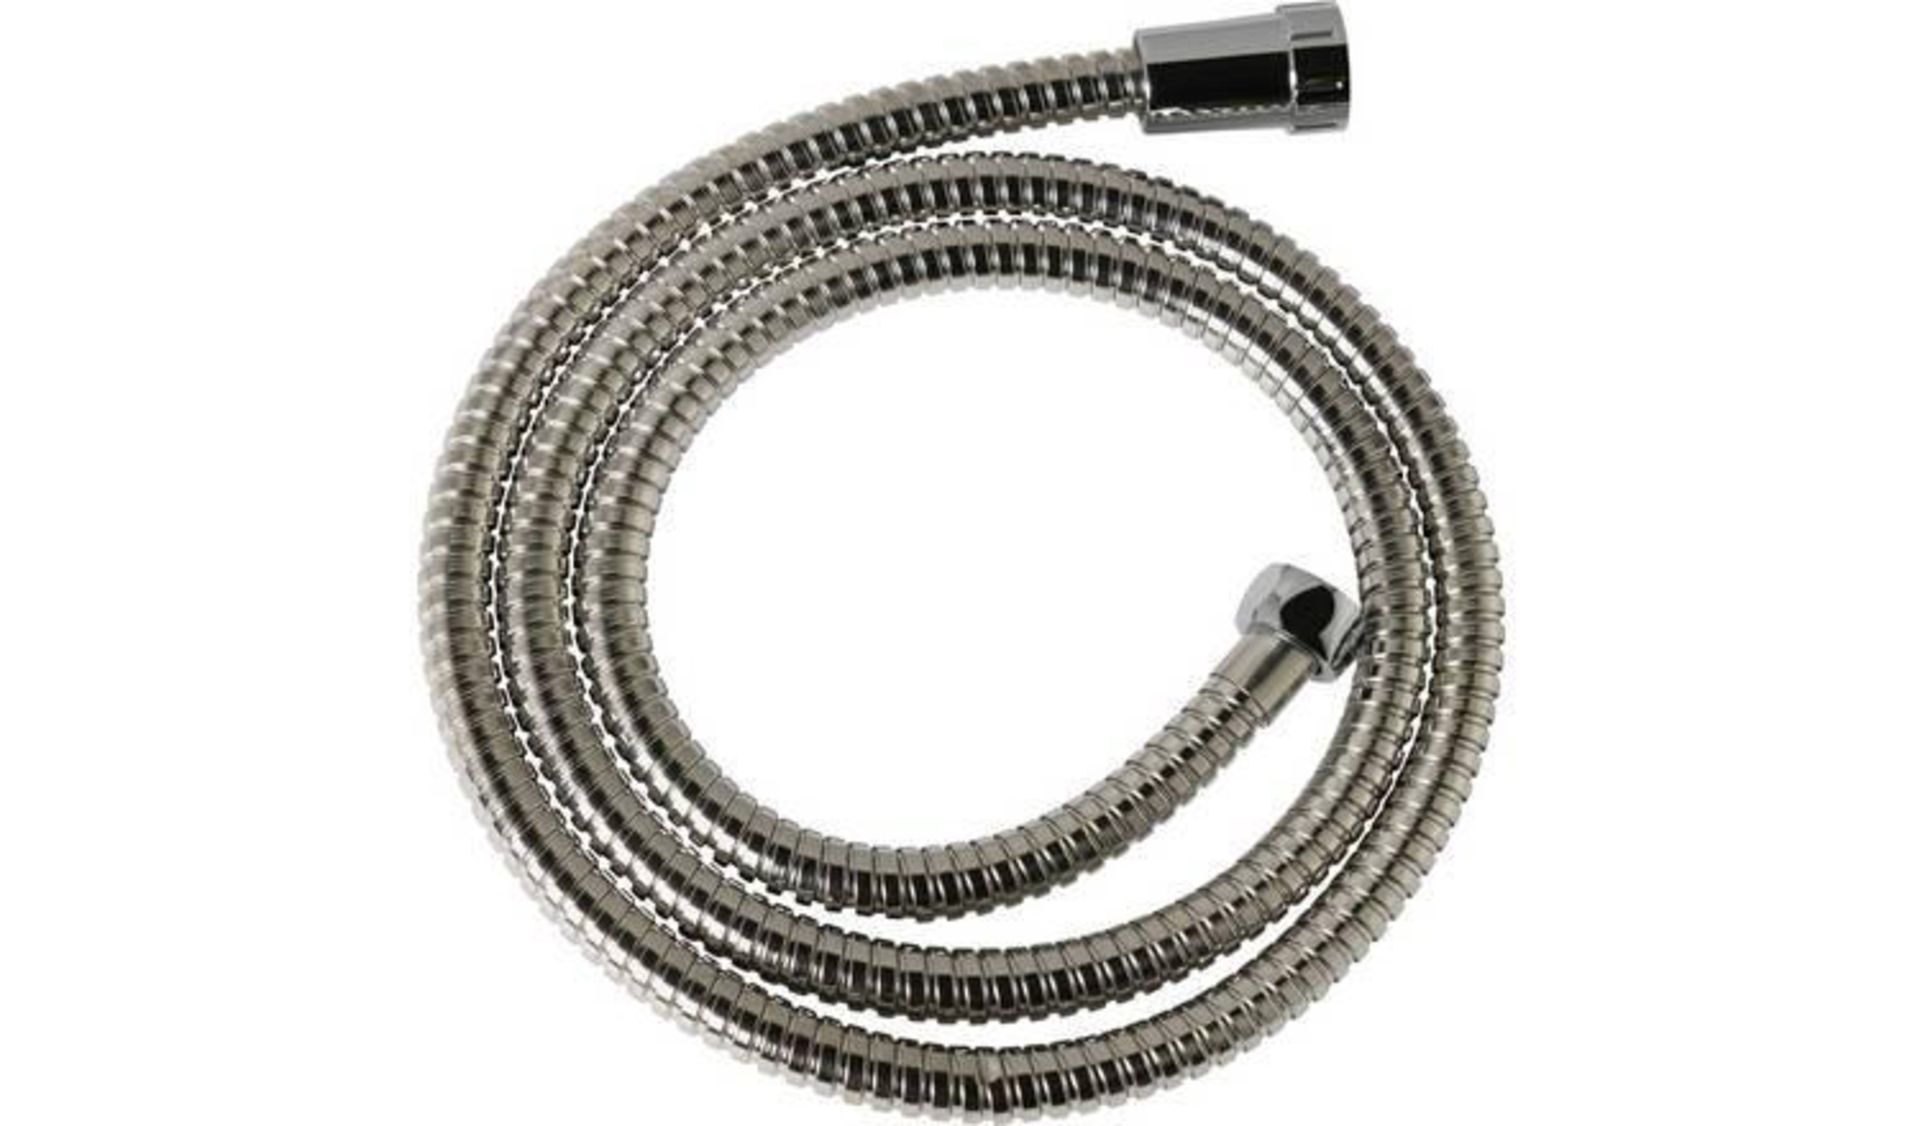 Argos Home Extendable 2m Stainless Steel Shower Hose 141/9614 £10.00 RRP